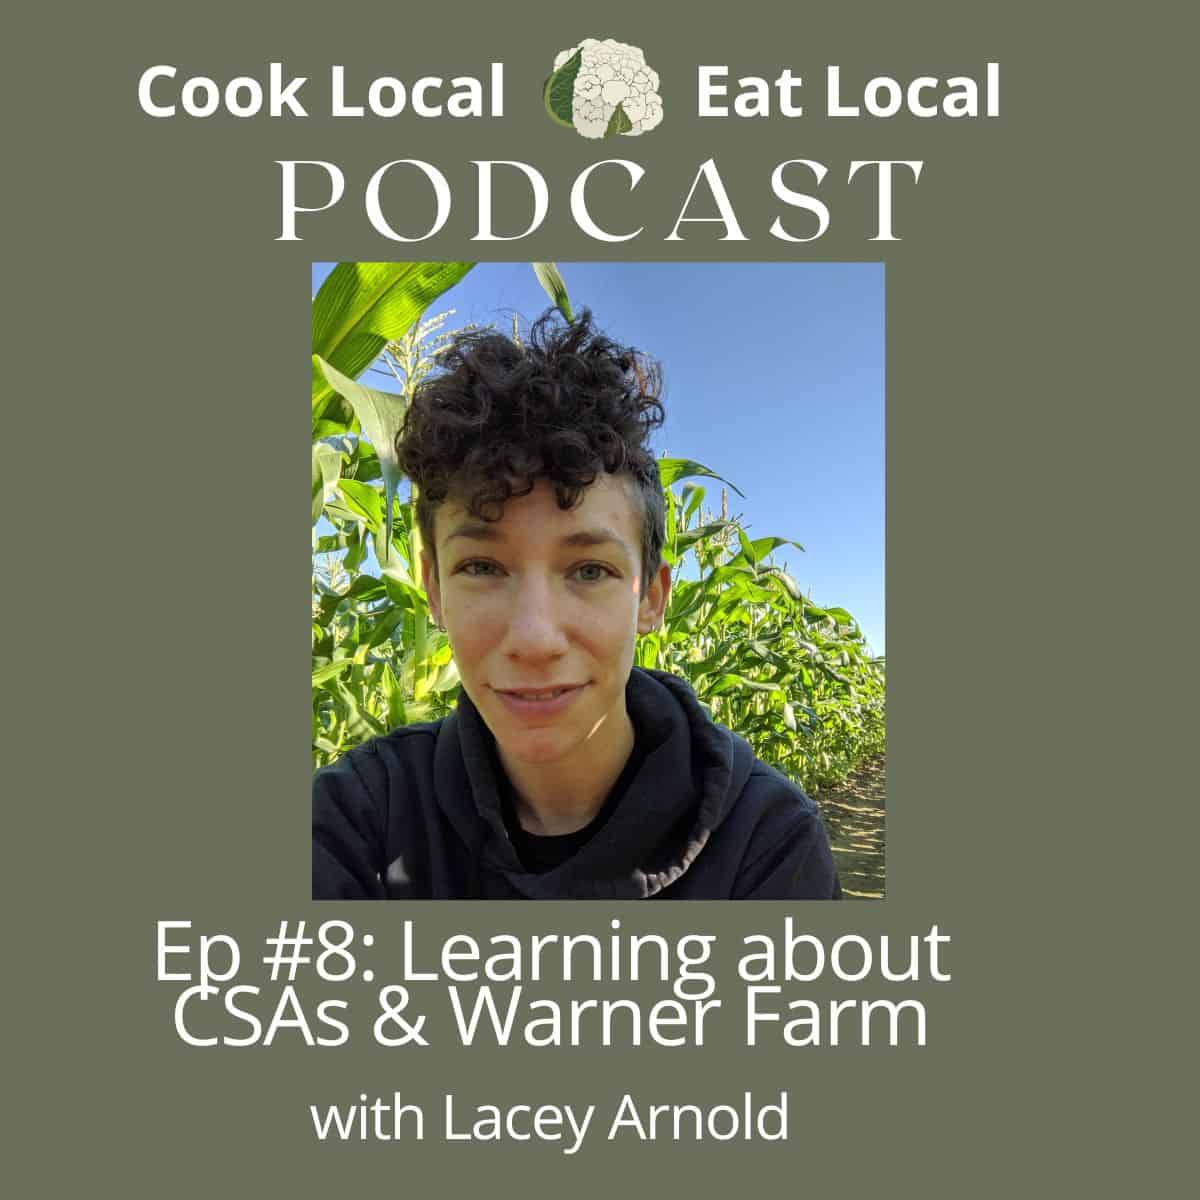 Podcast episode cover with a profile photo of guest Lacey Arnold, posing in a corn field. Dark green bacground with text "Learning about CSAs and Warner Farm".